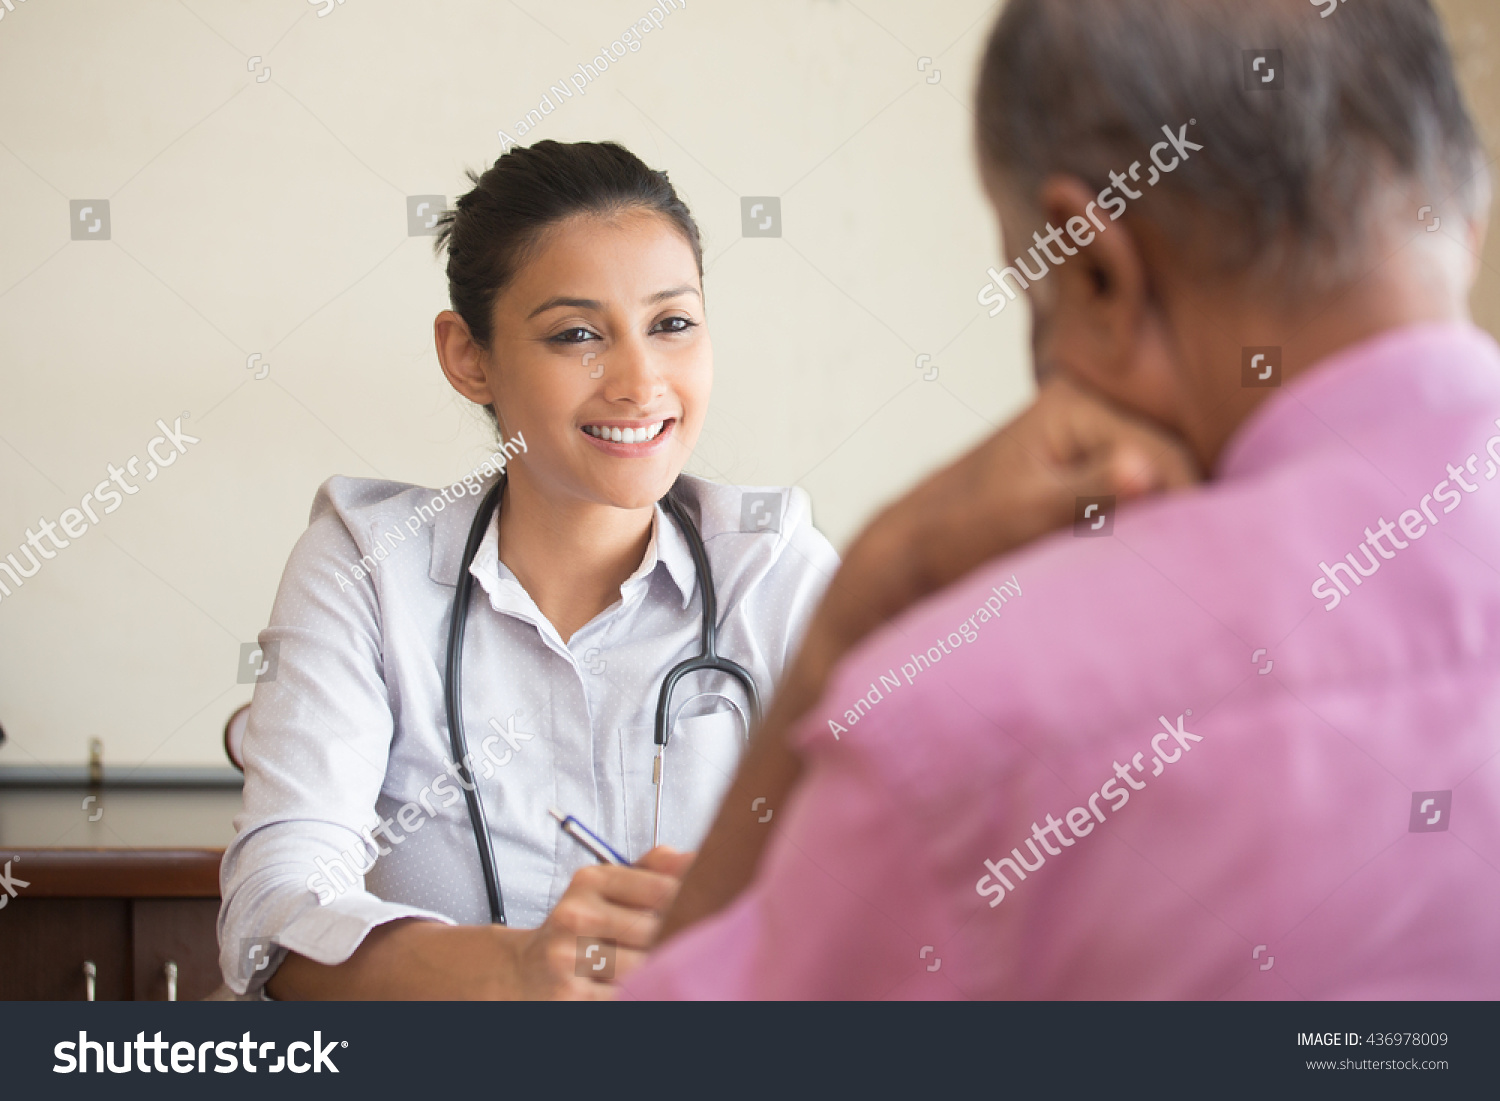 Closeup portrait, patient talking good news conversation to healthcare professional, isolated indoors background #436978009